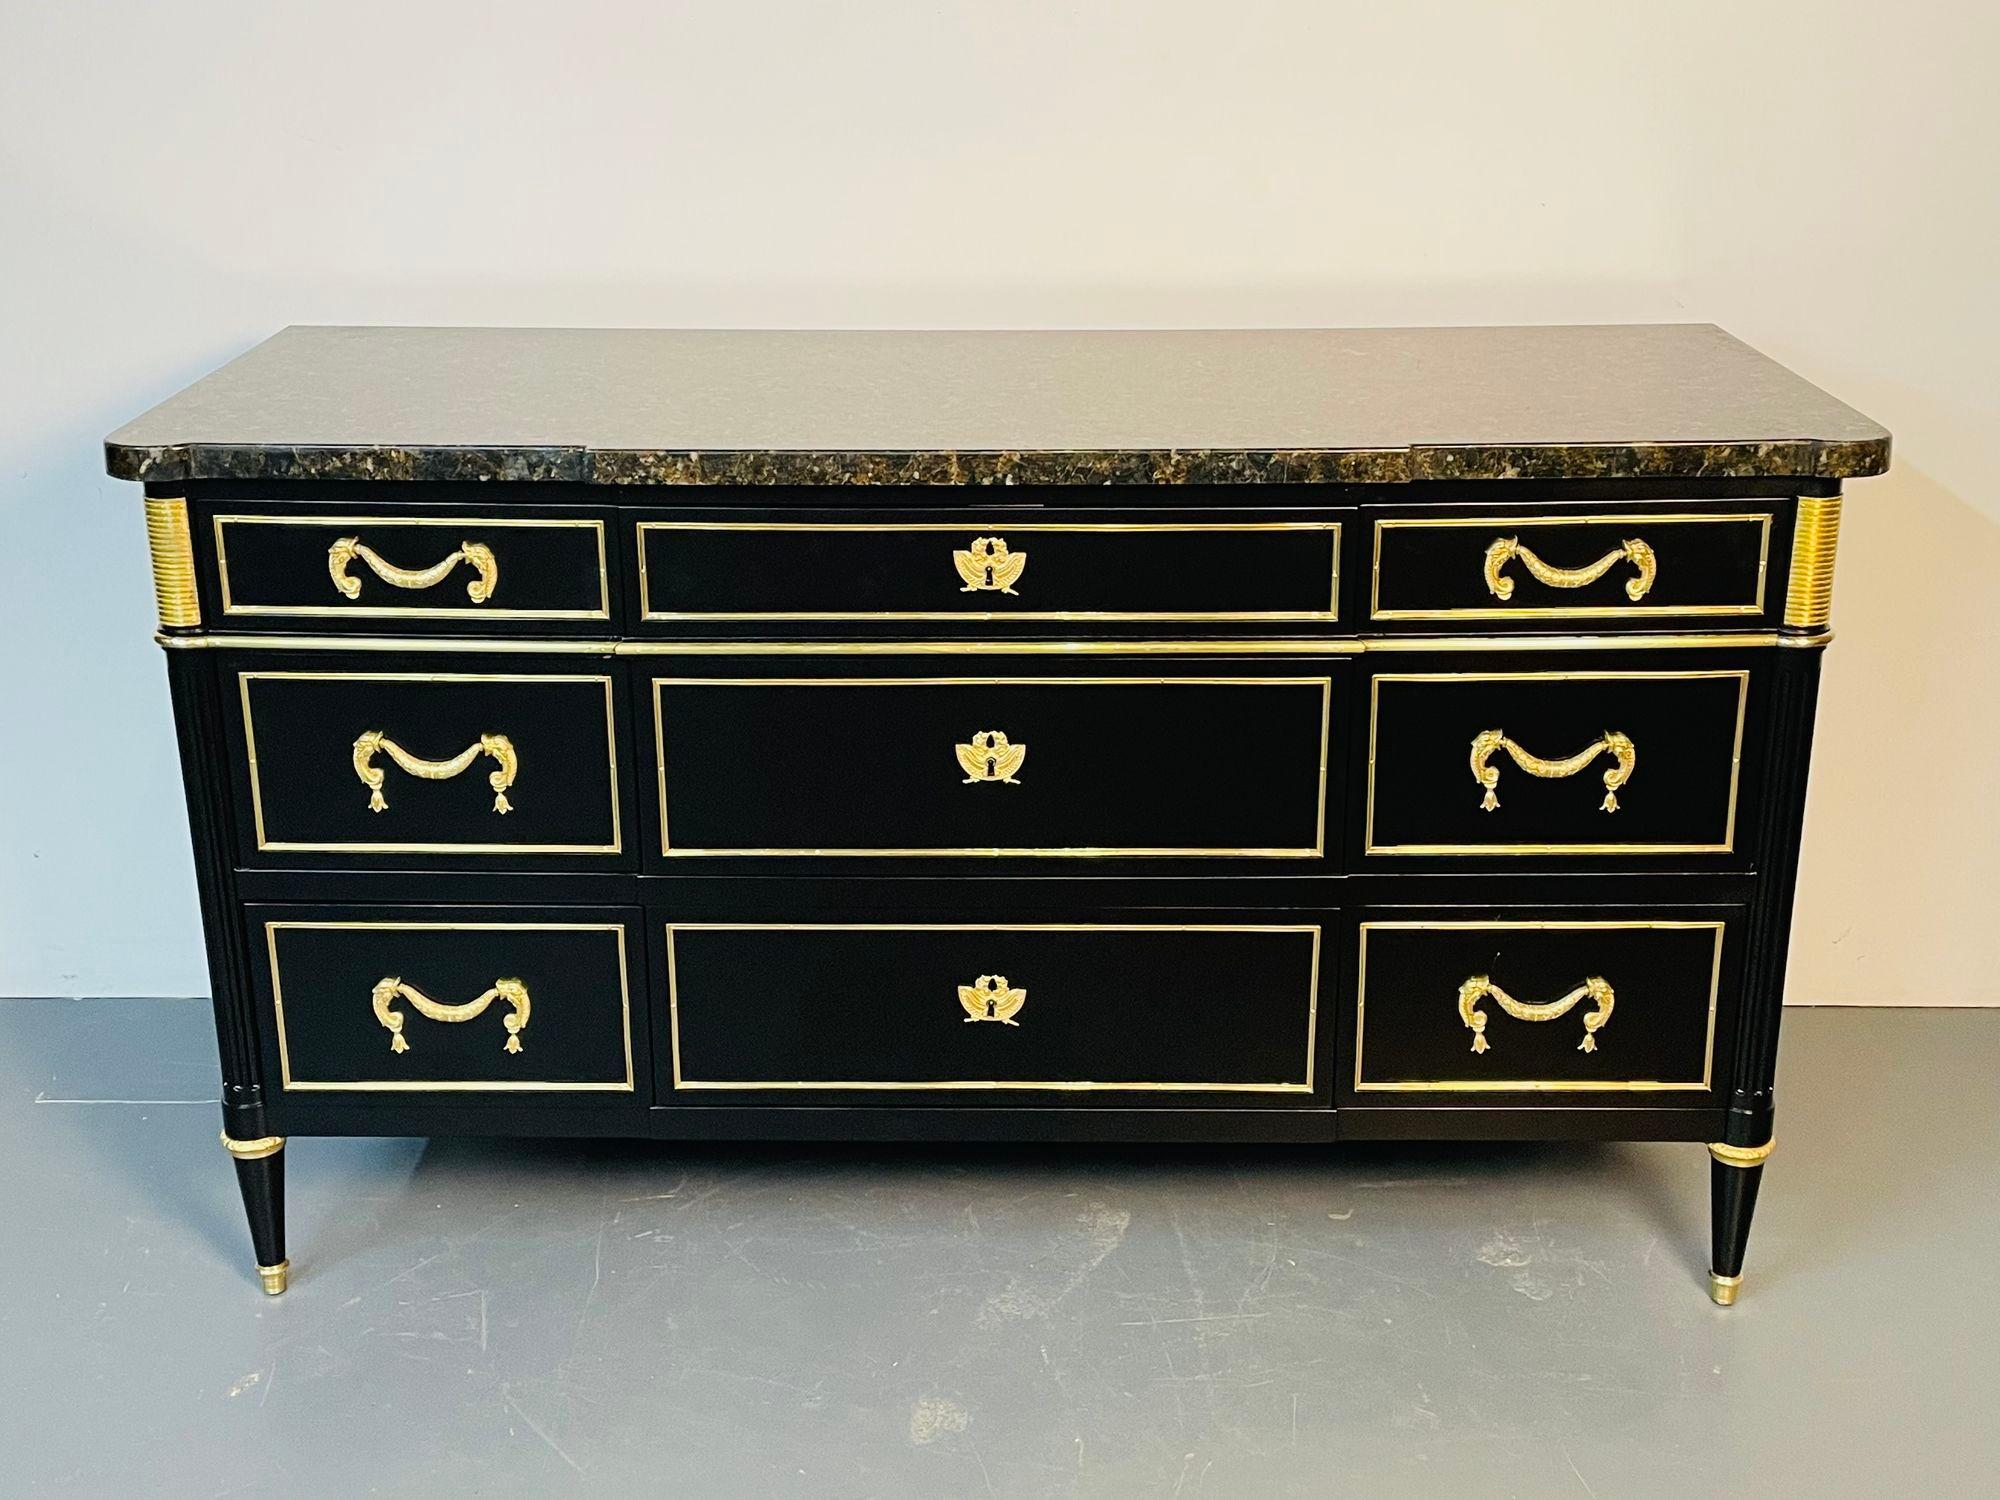 French Hollywood Regency chest or commode by Maison Jansen, bronze, marble.
A Hollywood Regency commode by Maison Jansen stamped Made in France. Nine drawers on this one of a kind stunning recently refinished to its original glory days chest. The